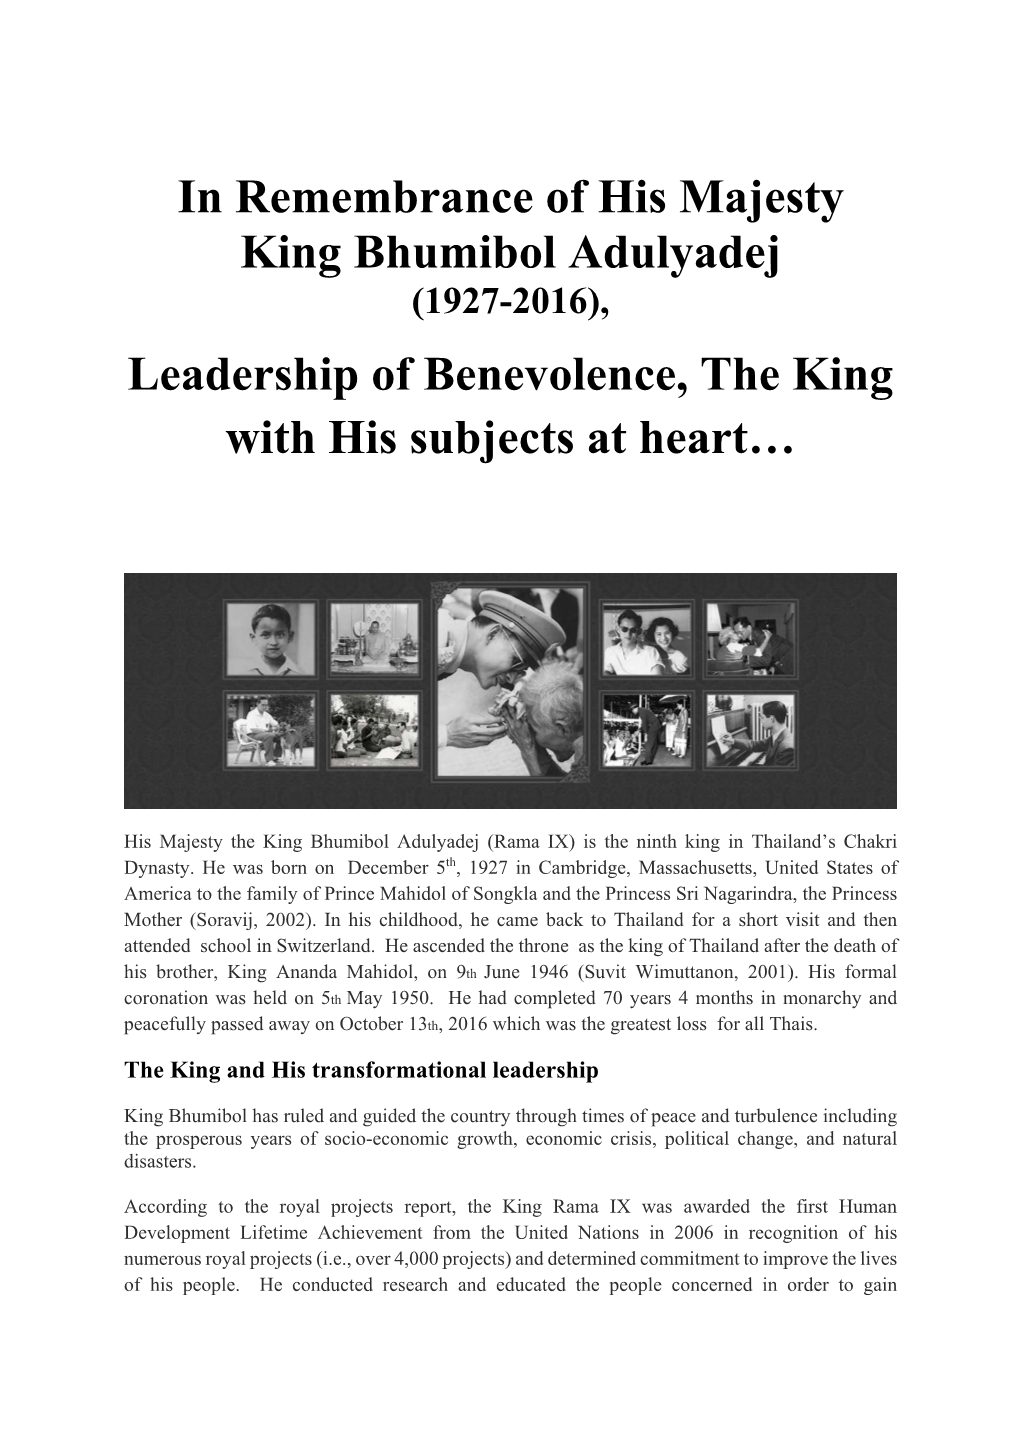 In Remembrance of His Majesty King Bhumibol Adulyadej Leadership Of